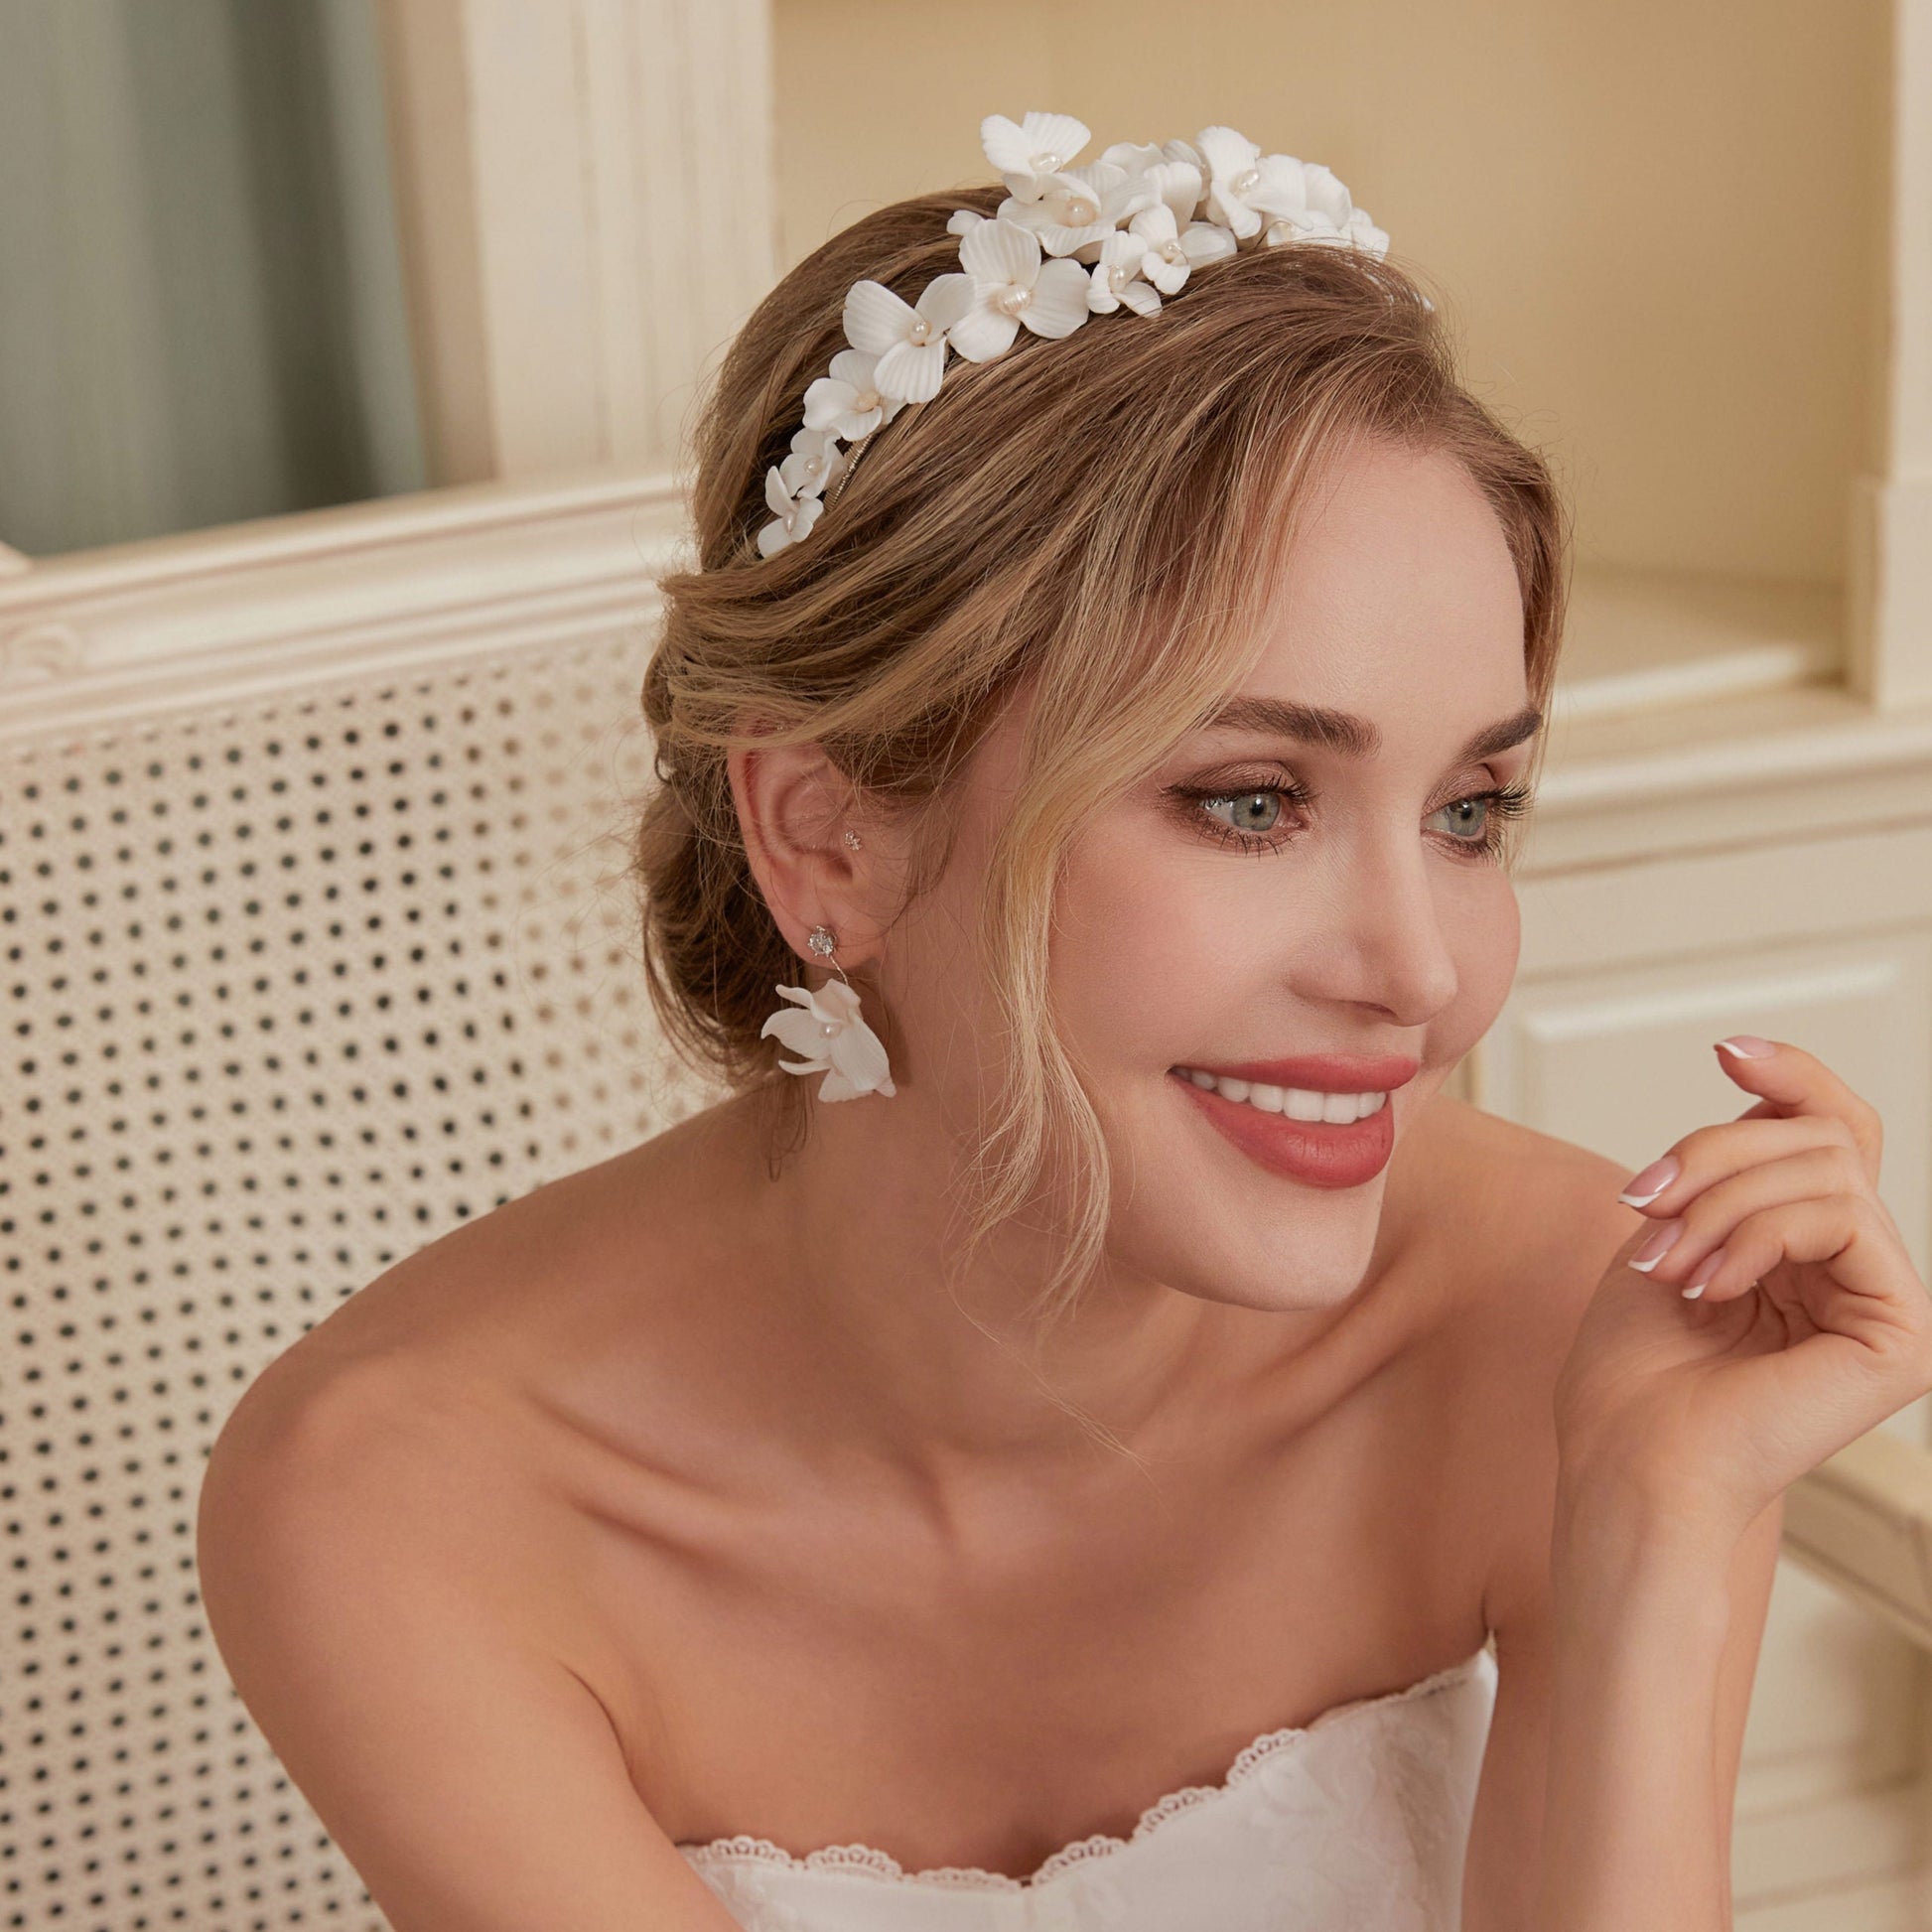 Skillfully handcrafted, these flower bridal earrings are the perfect complement to our signature porcelain headpieces. Each earring is exquisitely made by hand, featuring two delicate white clay flowers adorned with freshwater pearls.